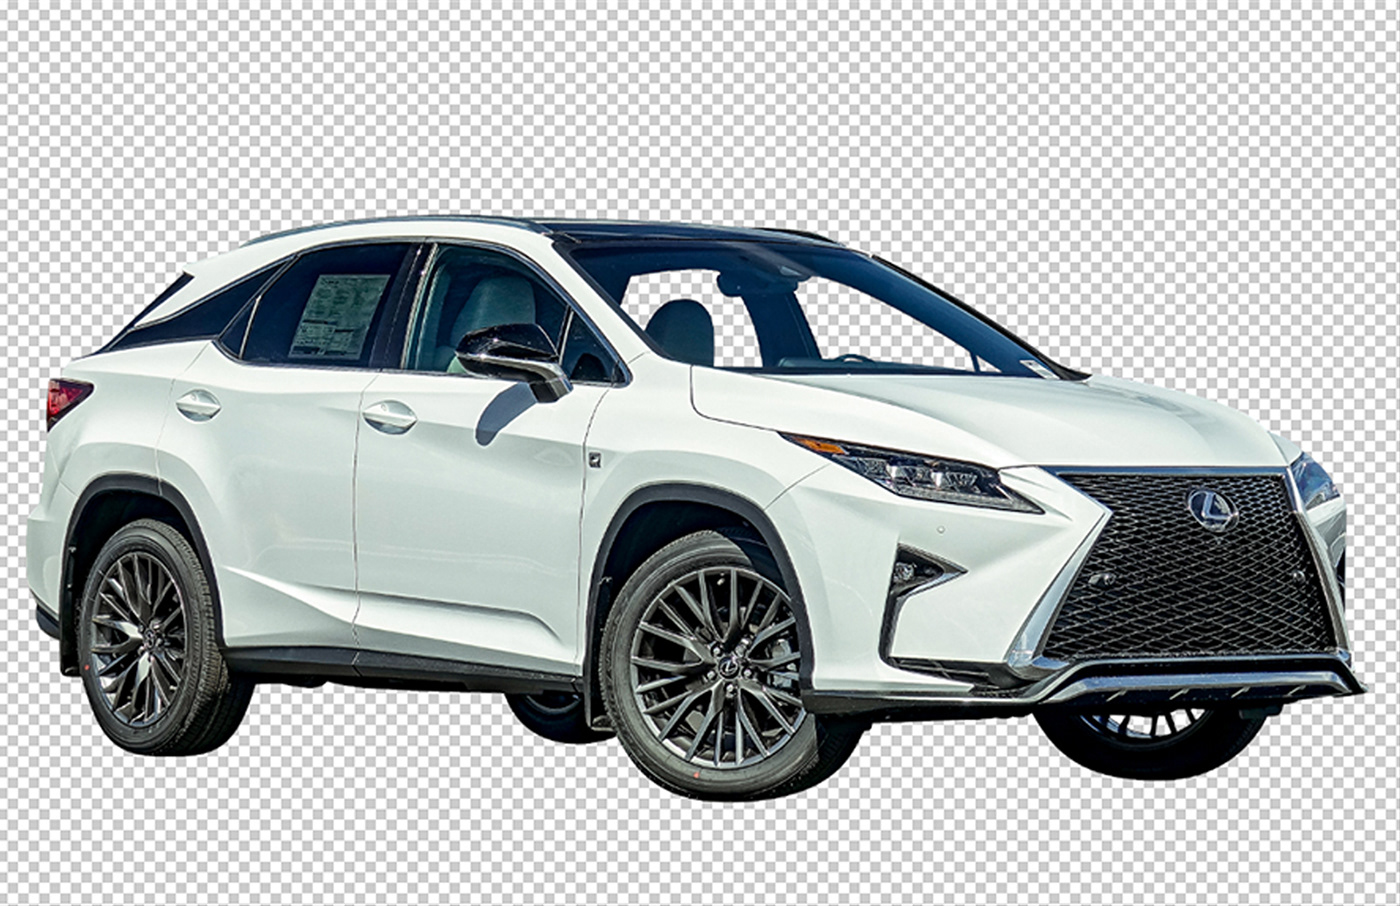 Background Remove background replacement car photo editing Clipping path cutout Image Editing photo edit shadow vehicle pic editing vehicles